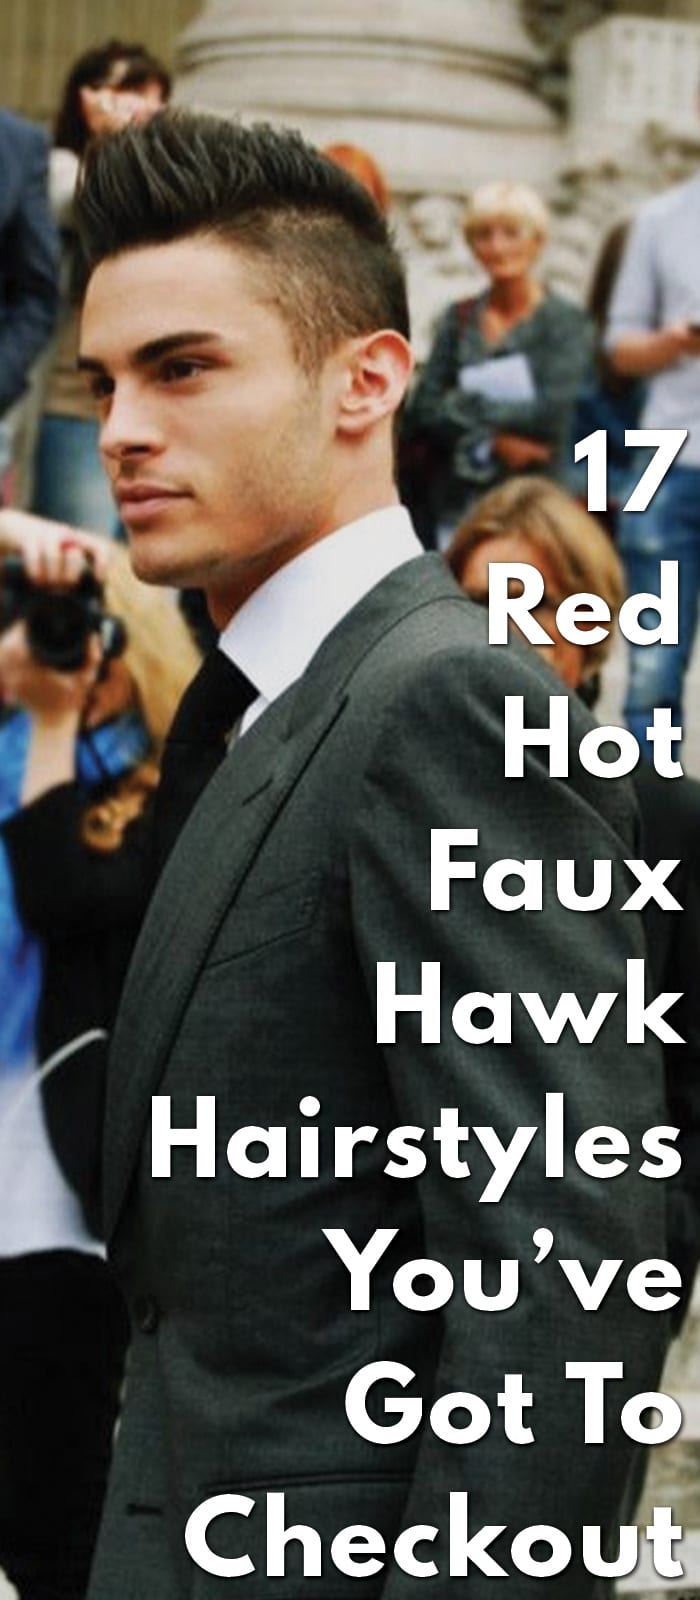 17-Red-Hot-Faux-Hawk-Hairstyles-You’ve-Got-to-Checkout